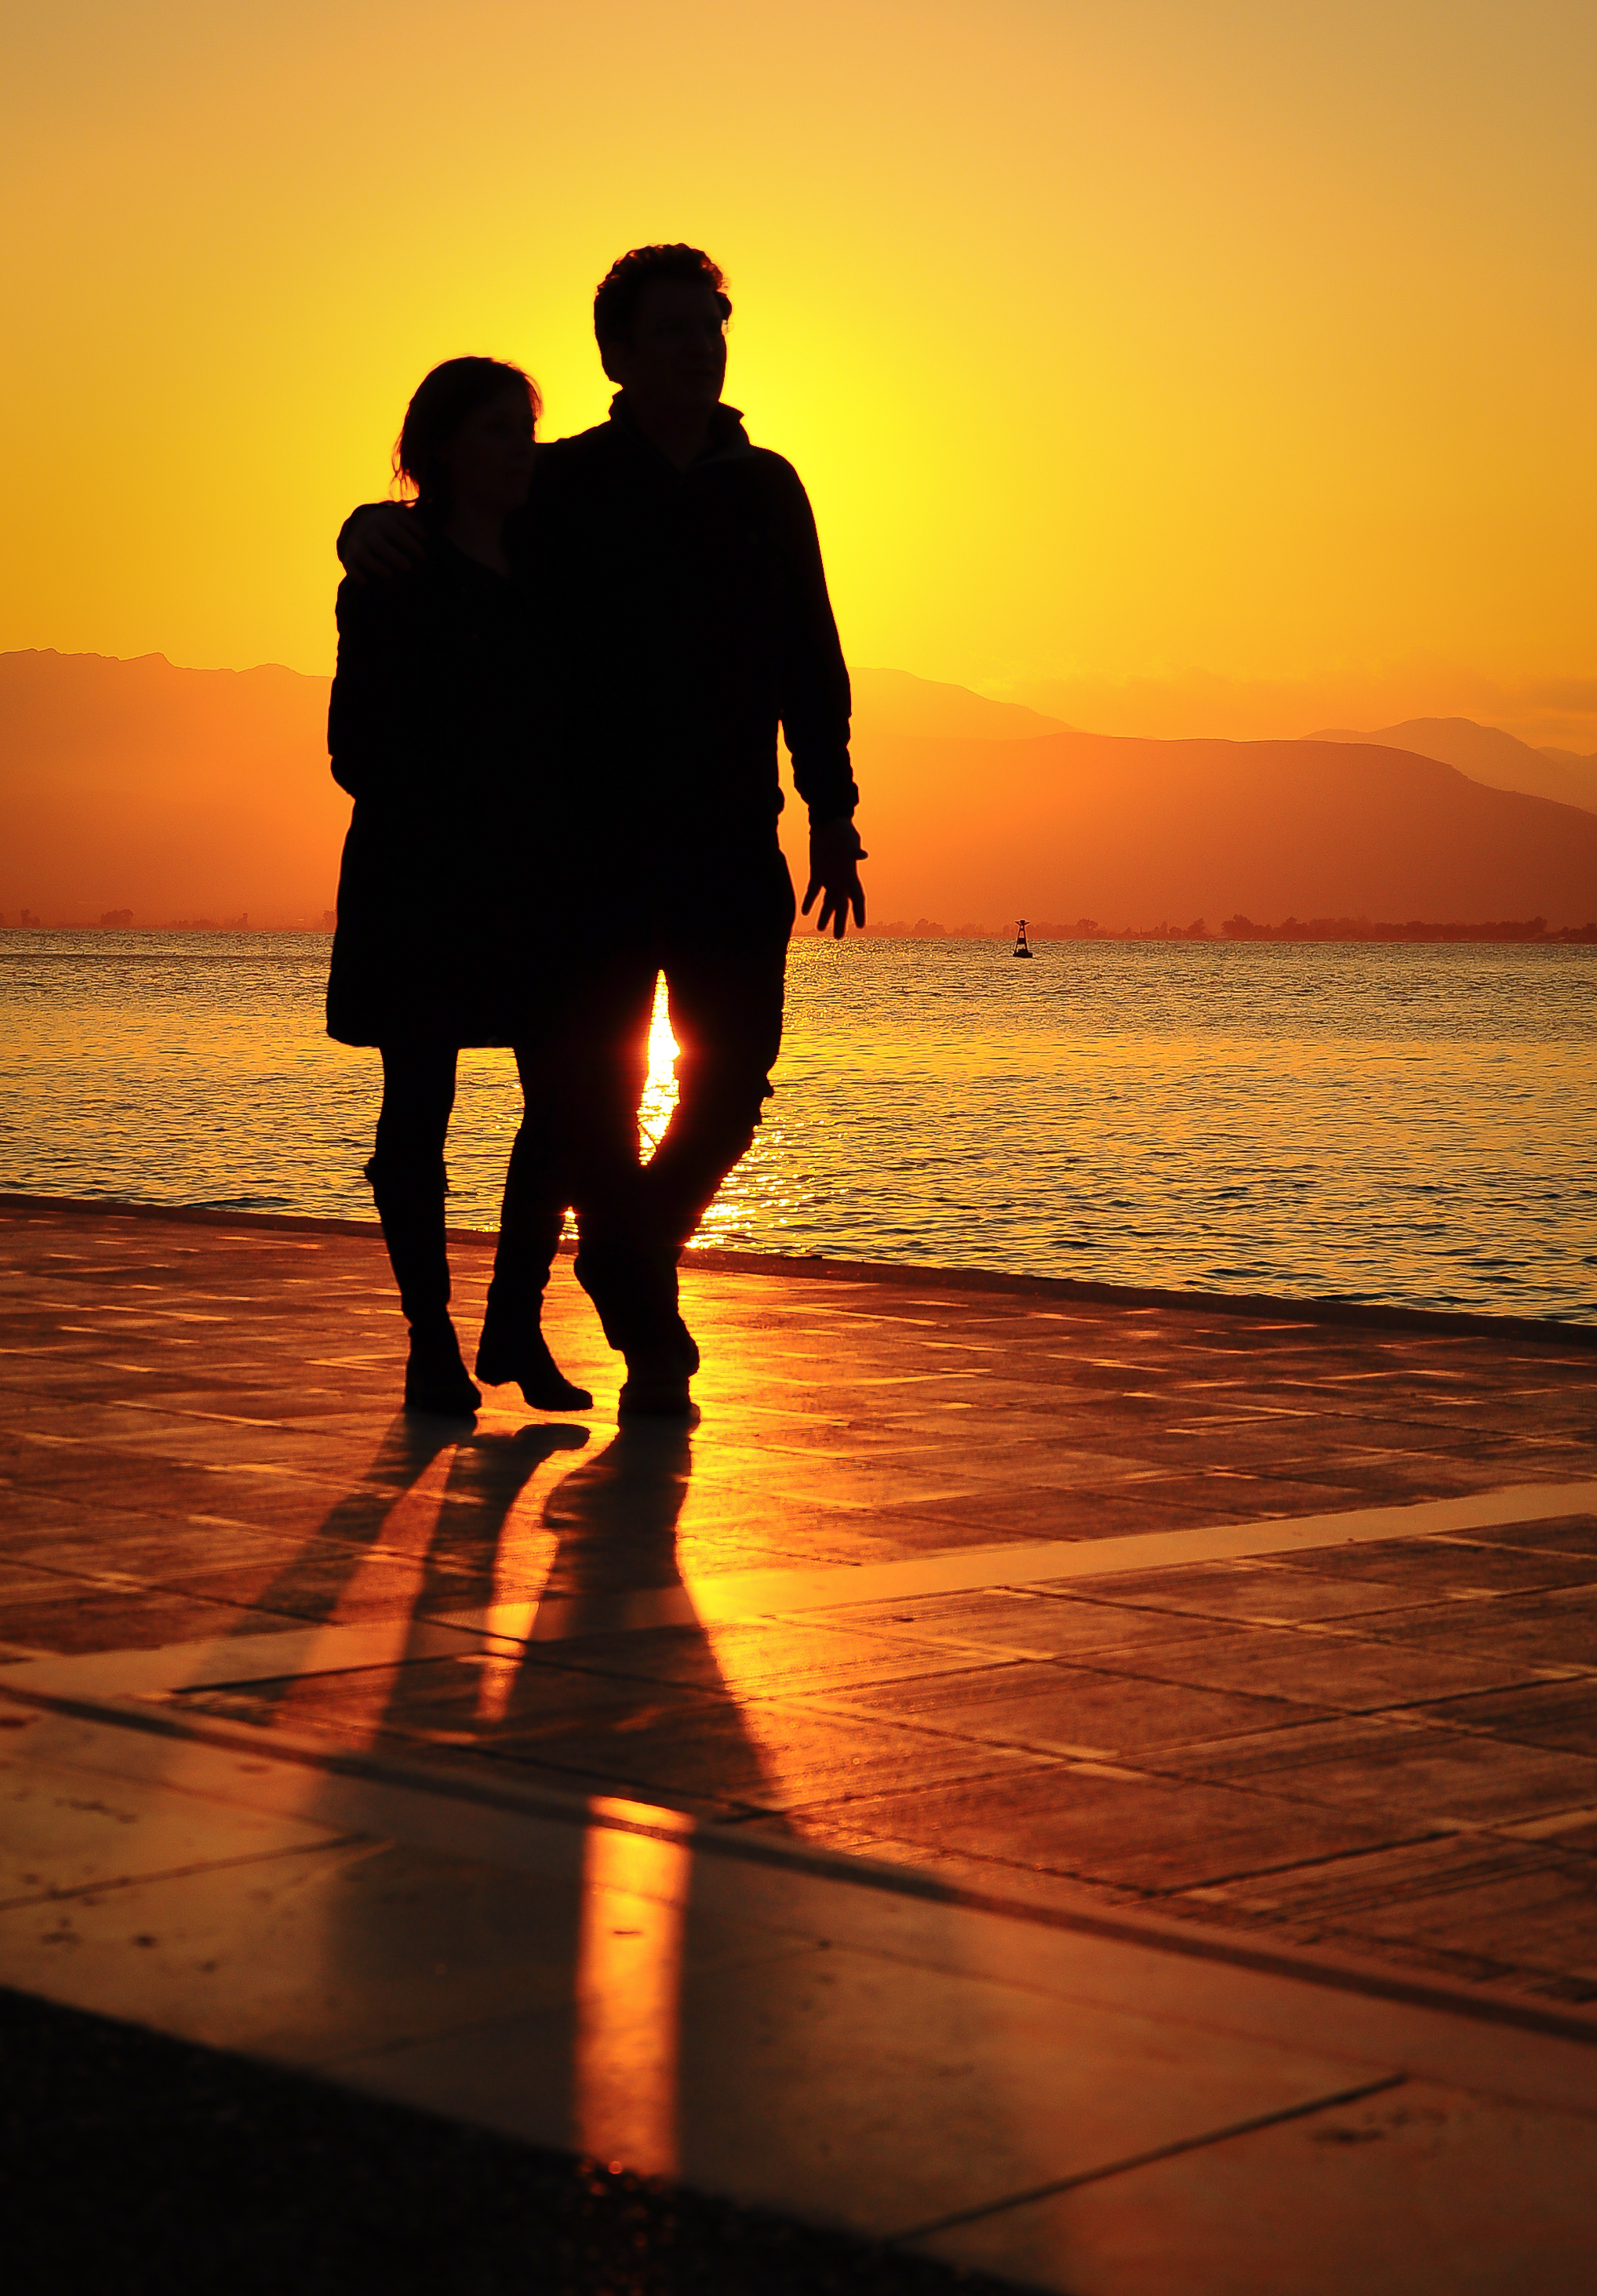 File:Couple at sunset on the beach.jpg - Wikimedia Commons